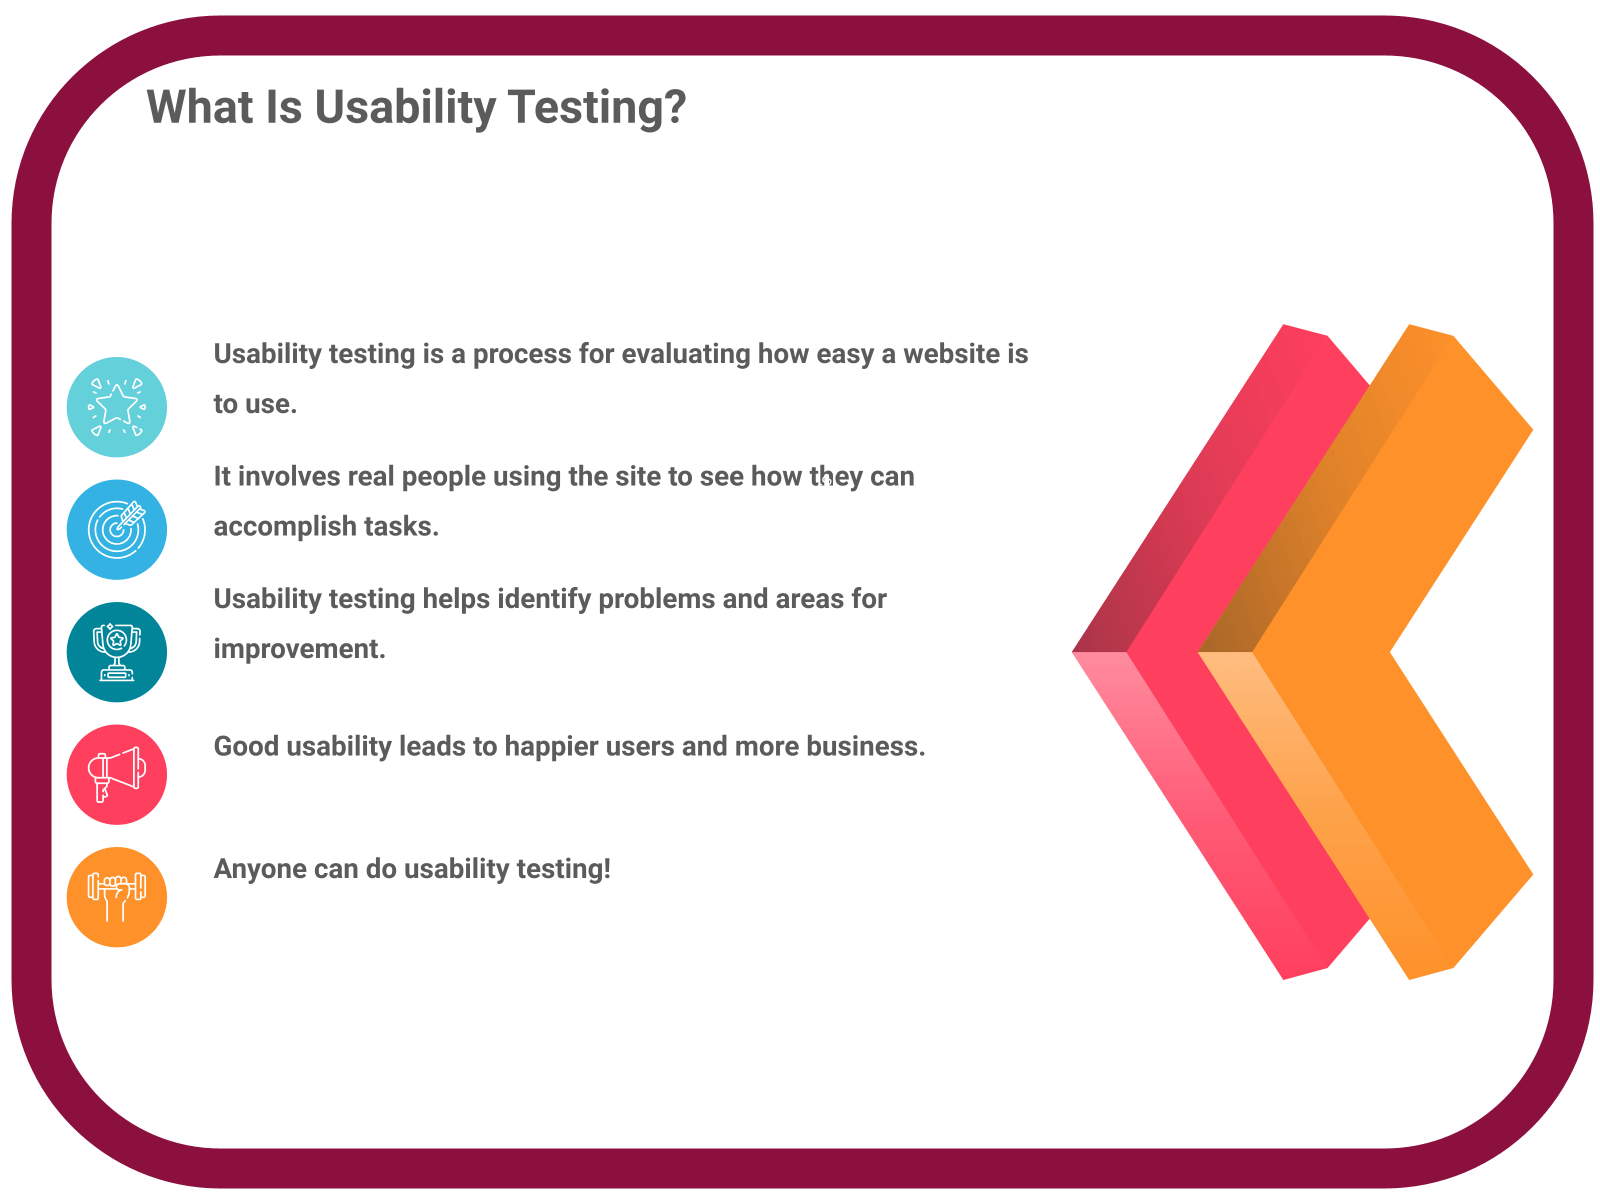 INFOGRAPHIC: what is usability testing? - Poll the People